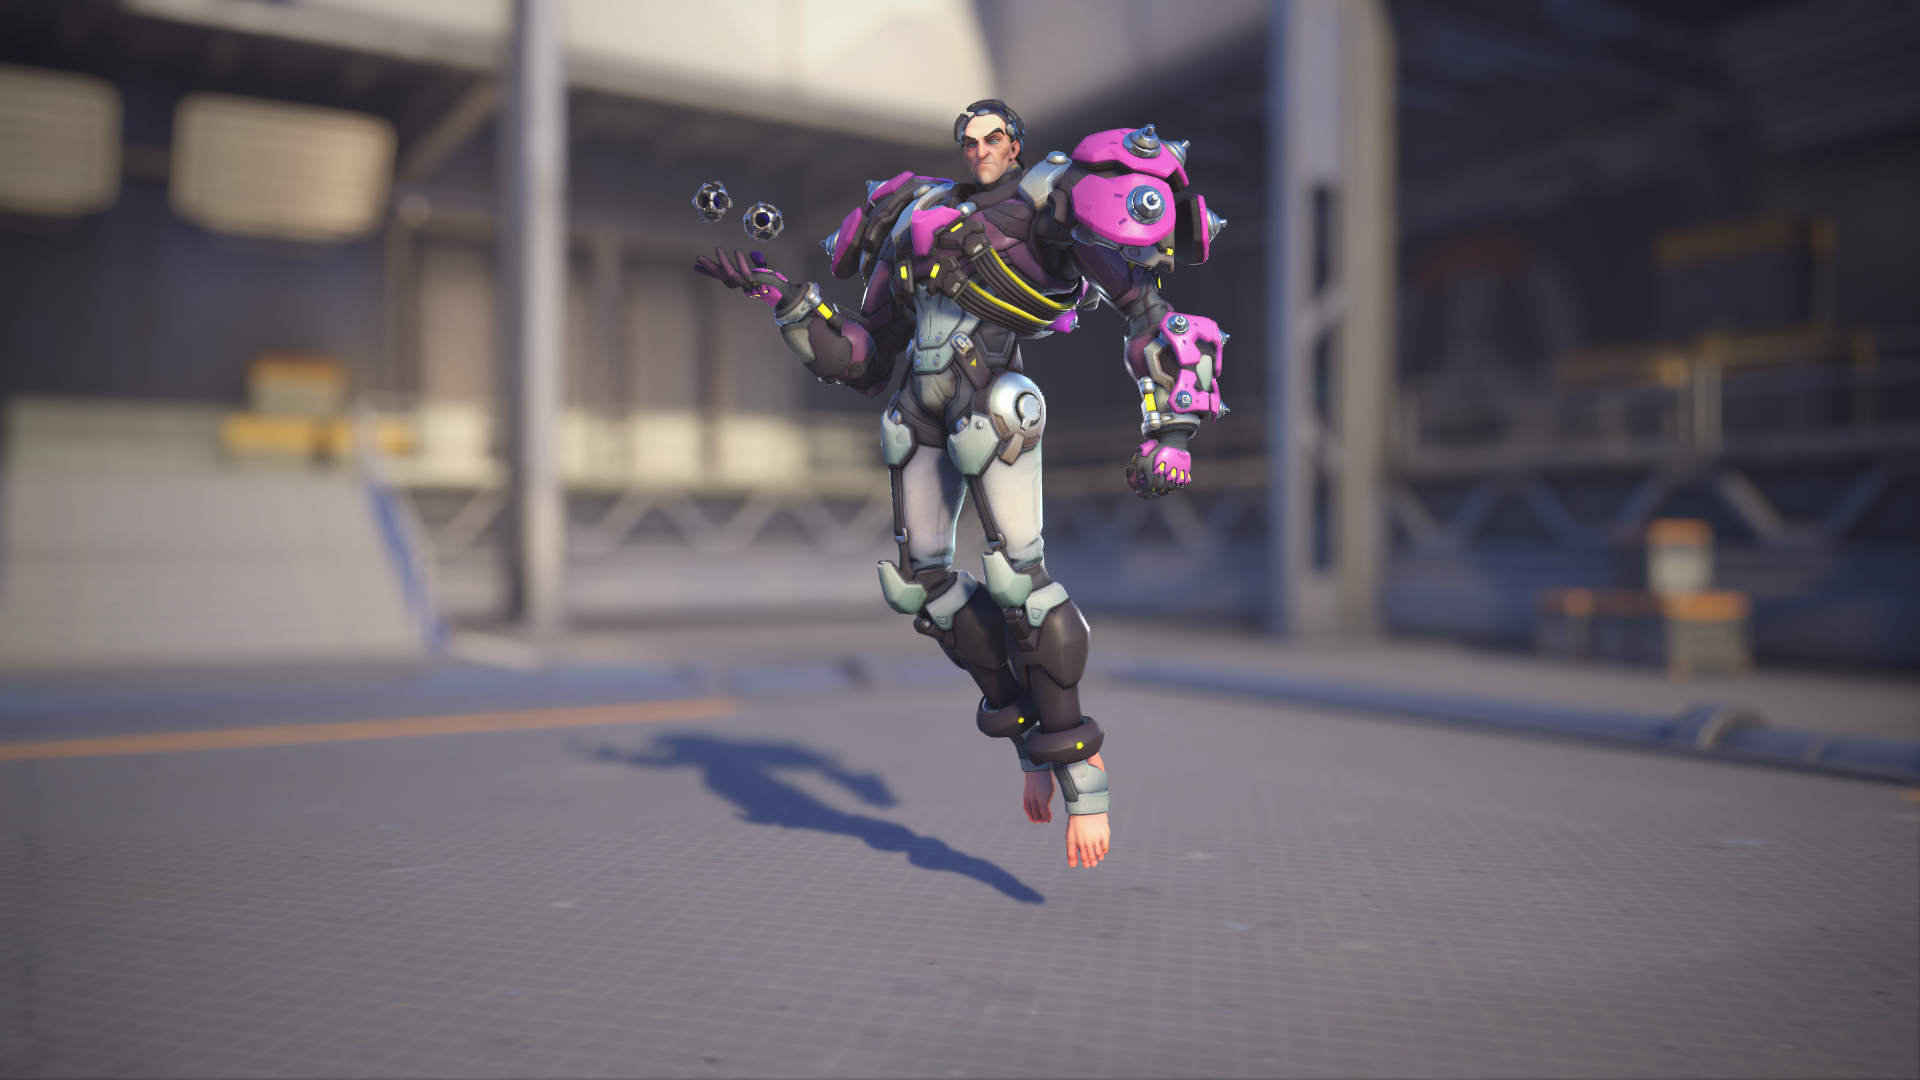 Sigma models his Roze skin in Overwatch 2.